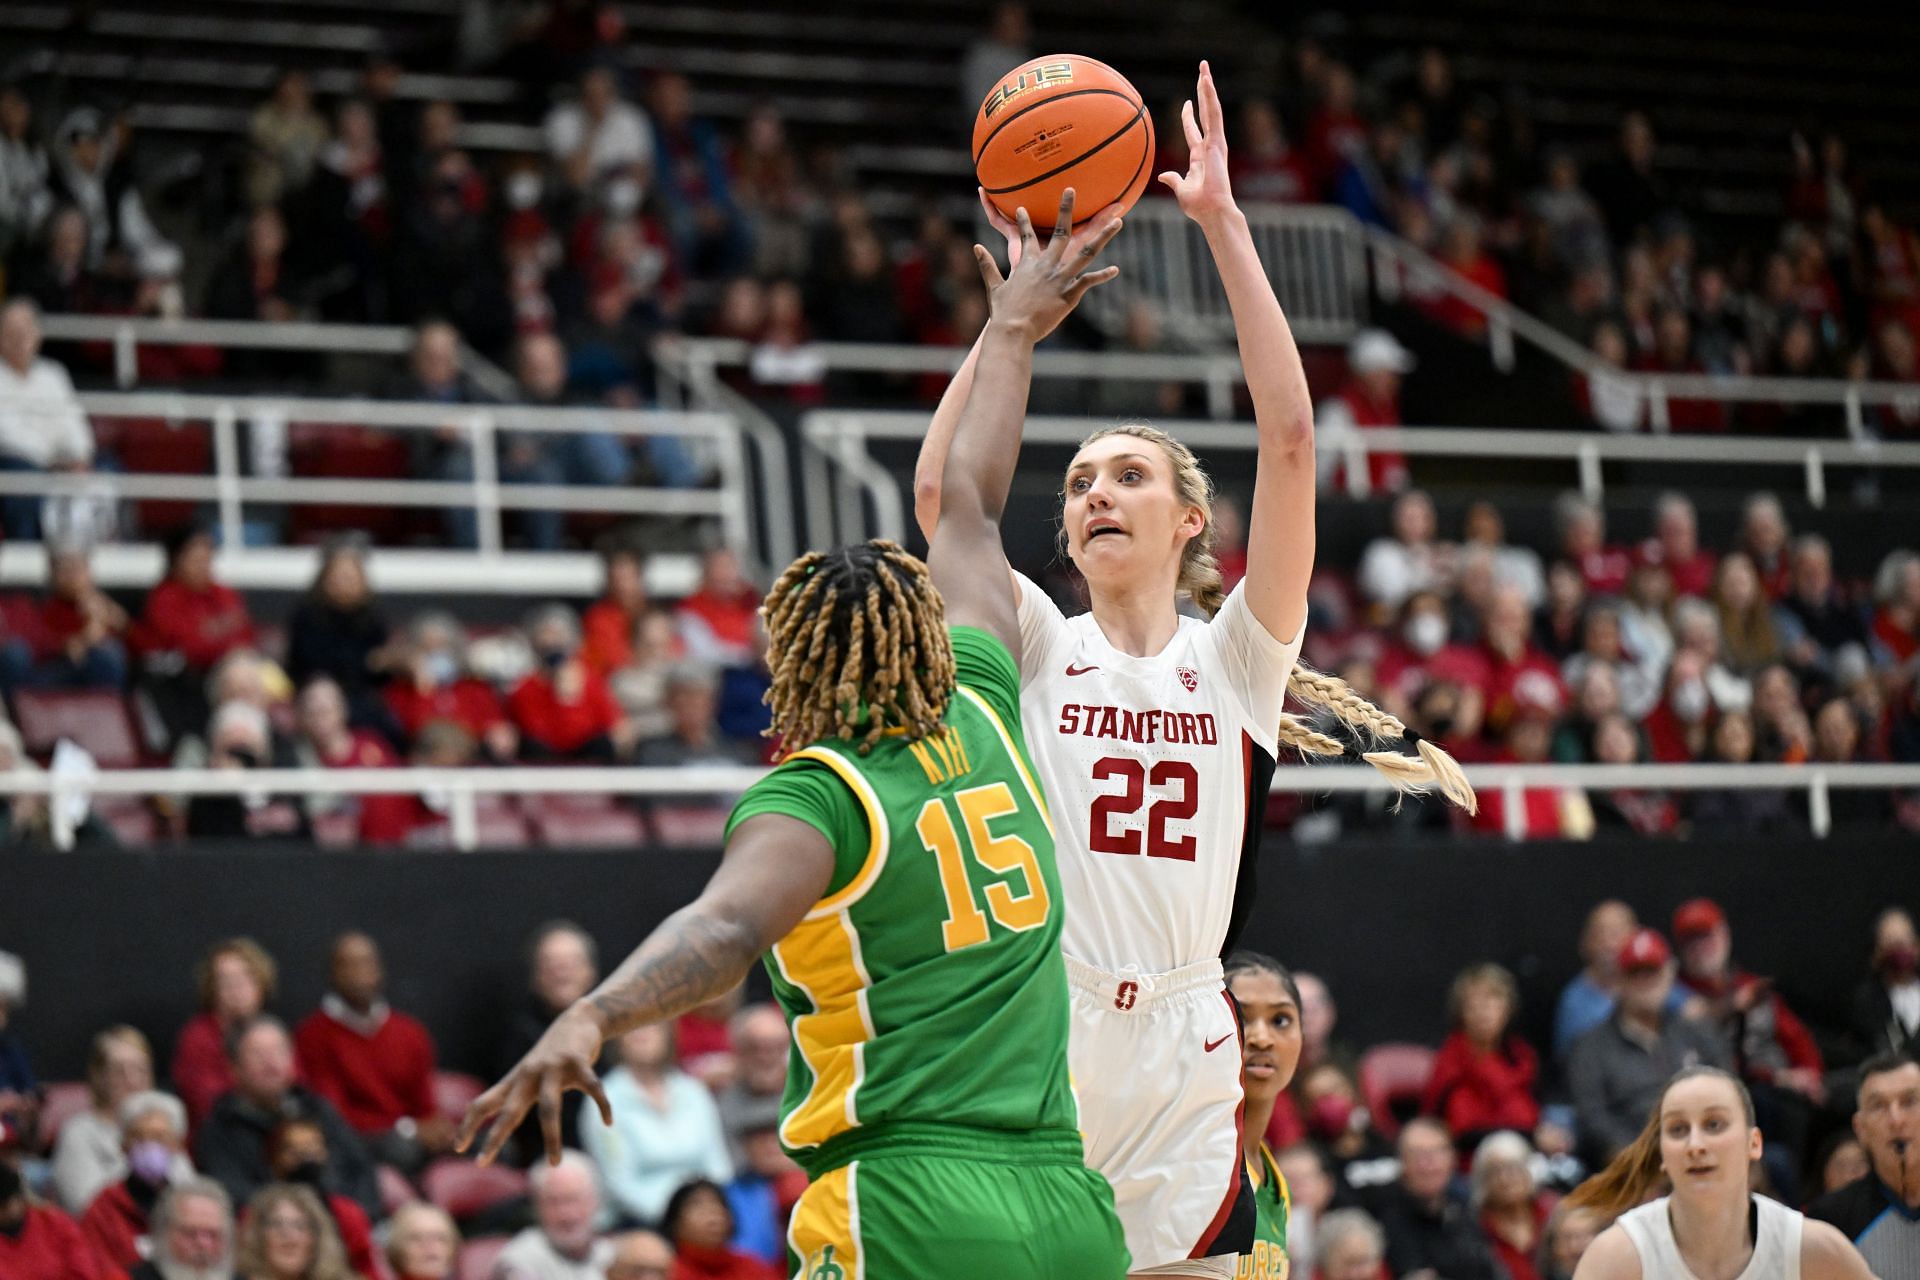 Cameron Brink, #22 of the Stanford Cardinals, shoots the ball.